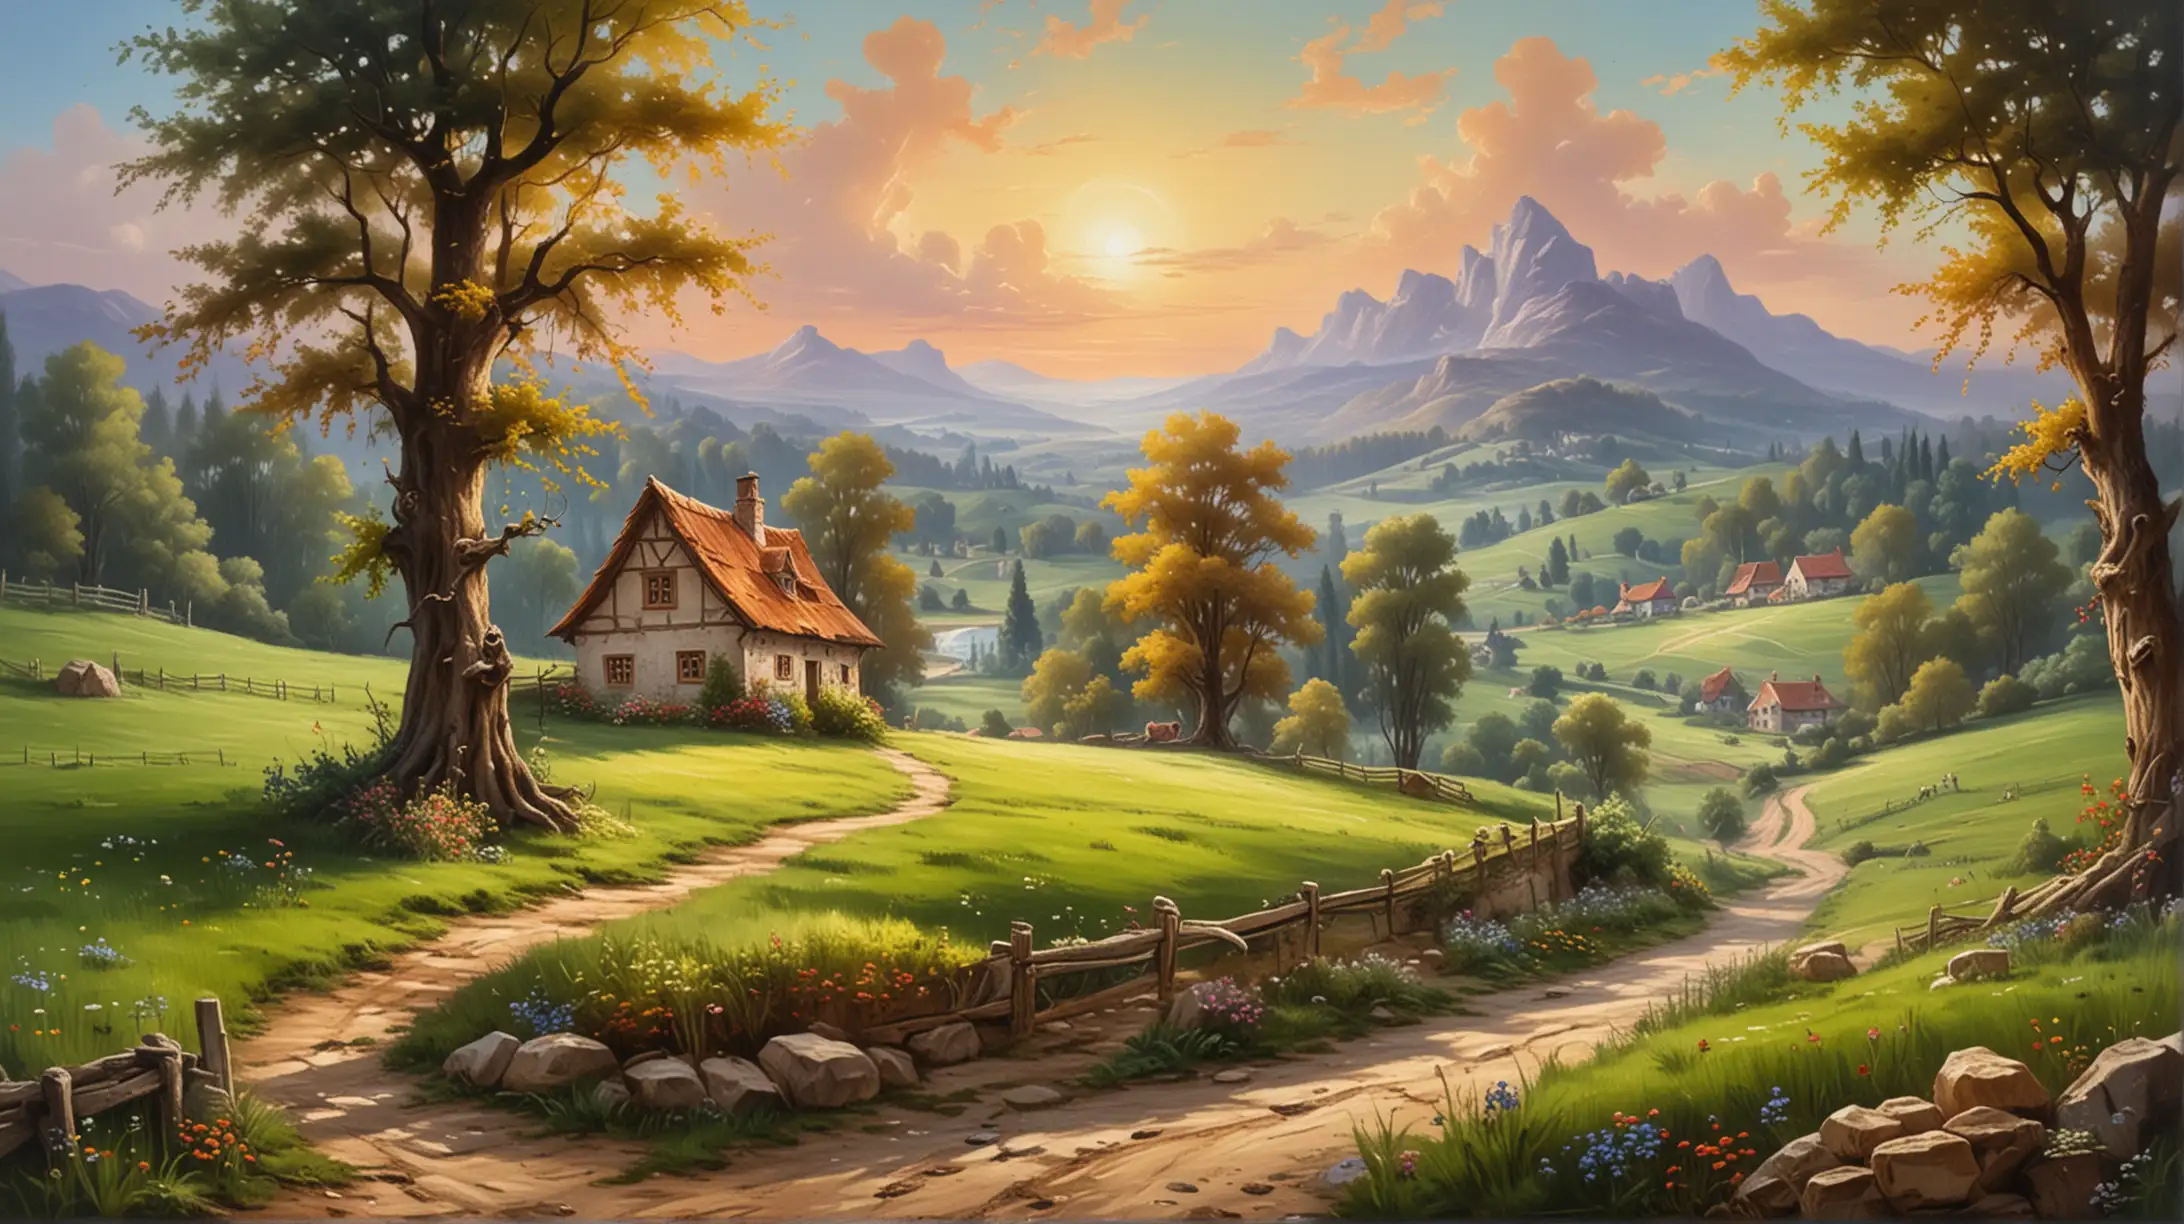 Enchanting Oil Painting of a Countryside Fairy Tale Scene